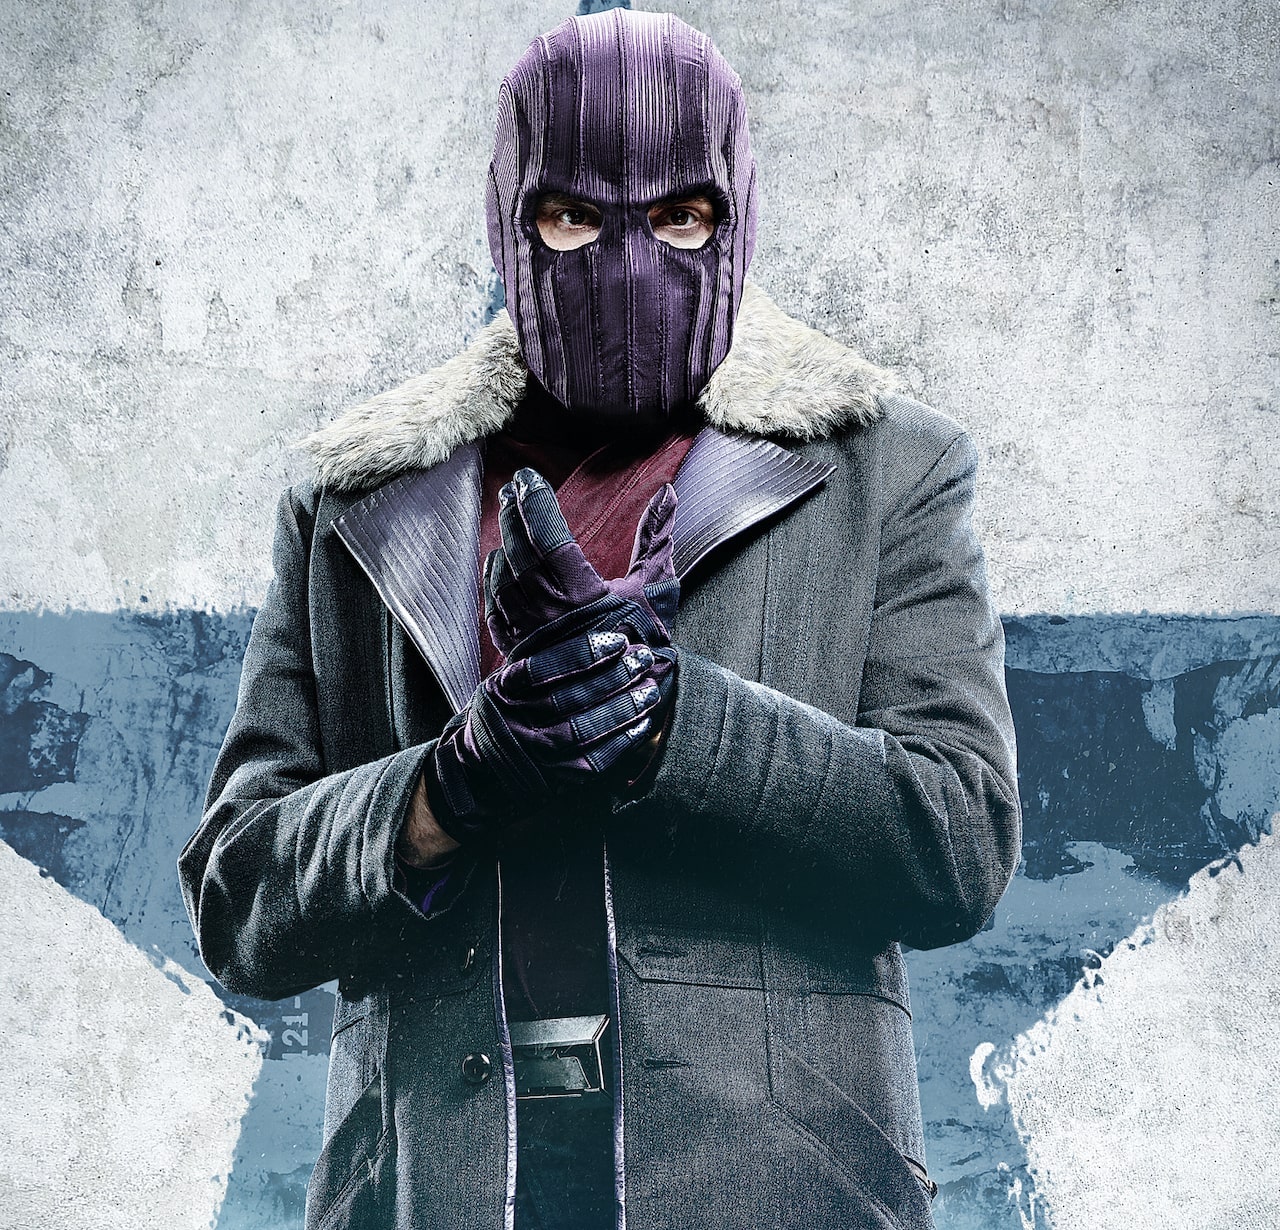 Shake off those 'WandaVision' blues with 'The Falcon and the Winter Soldier' posters